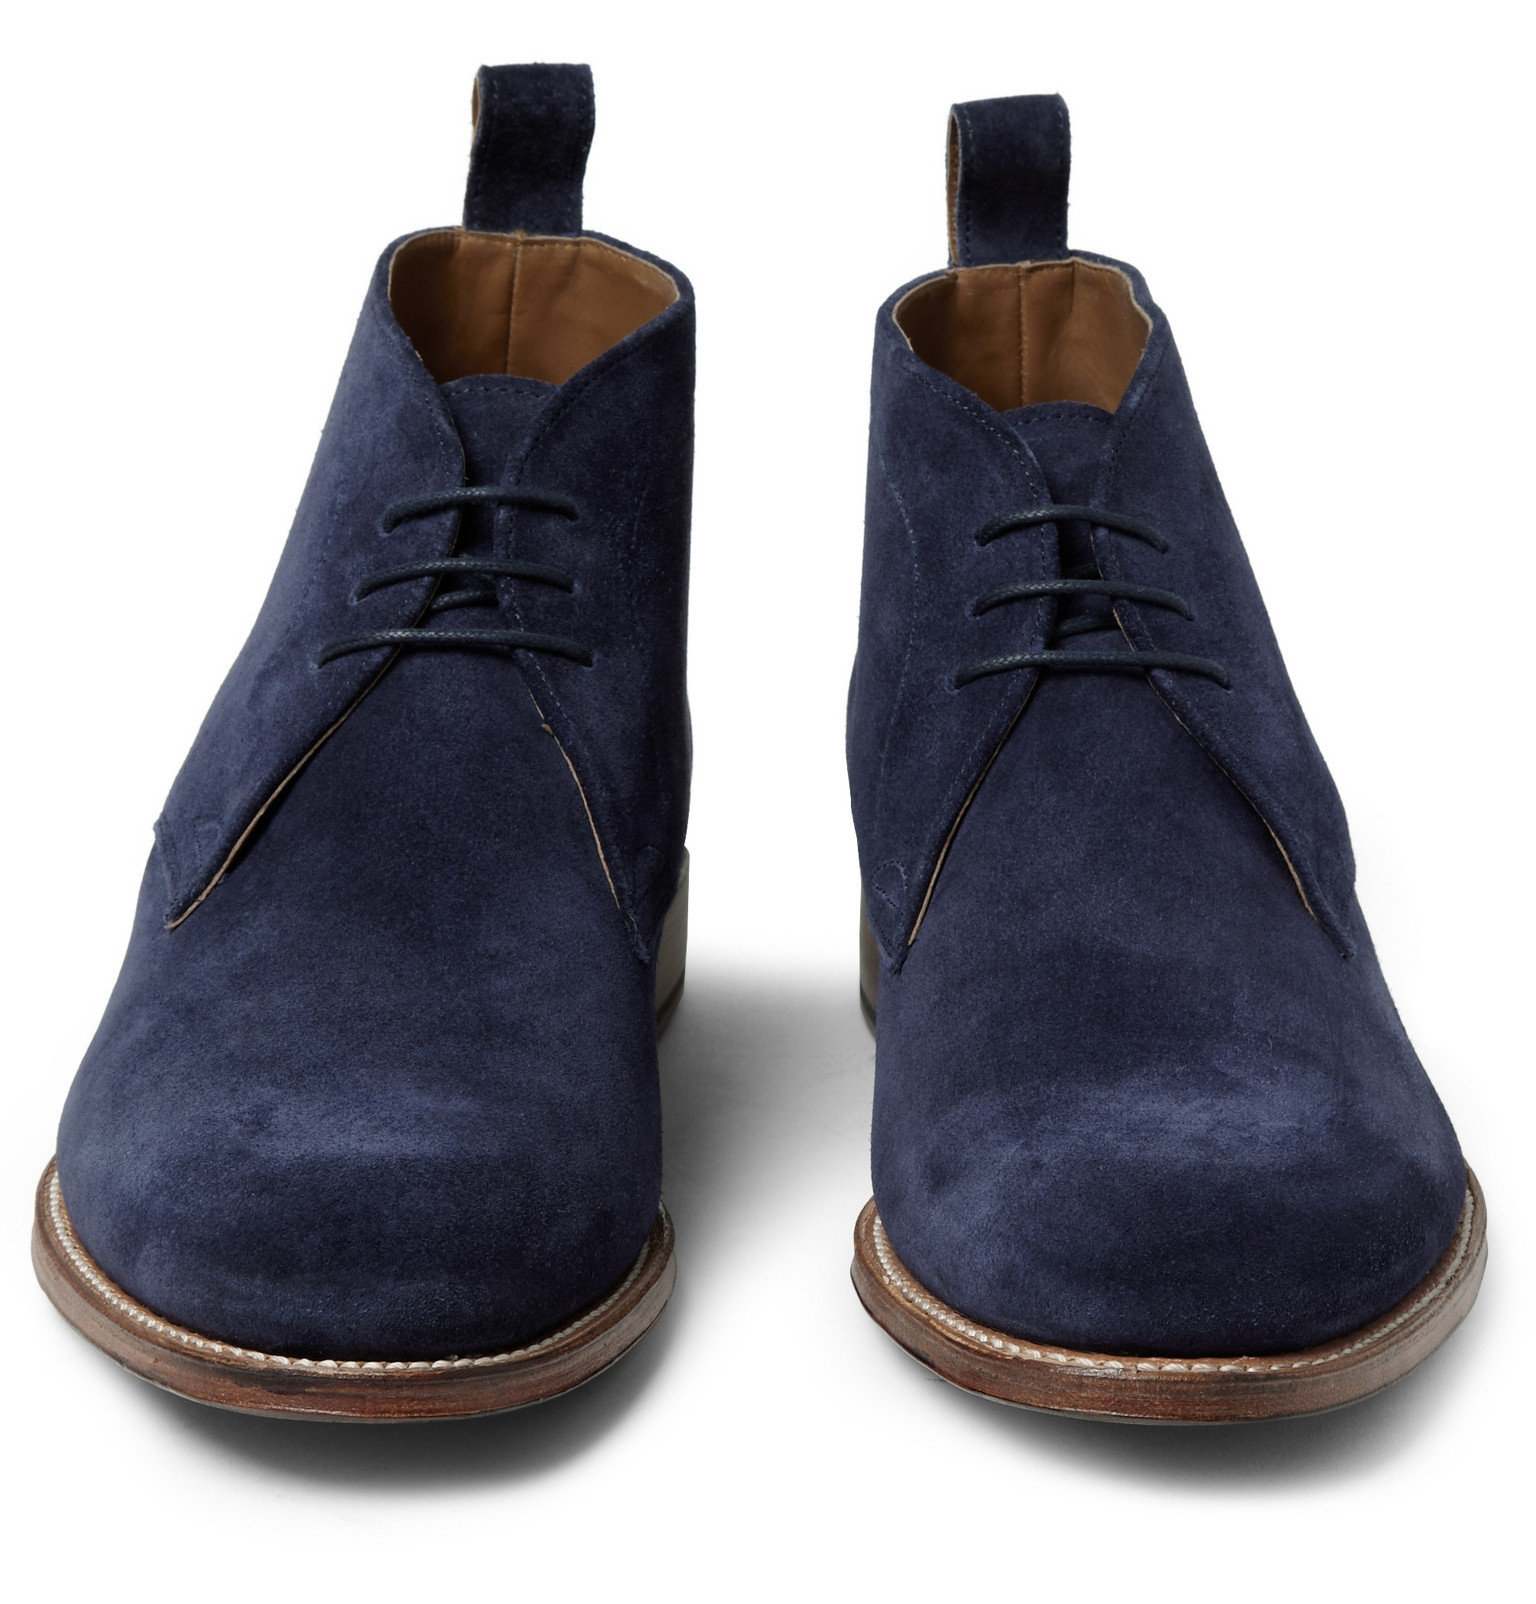 Grenson Marcus Suede Chukka Boots in Navy (Blue) for Men - Lyst